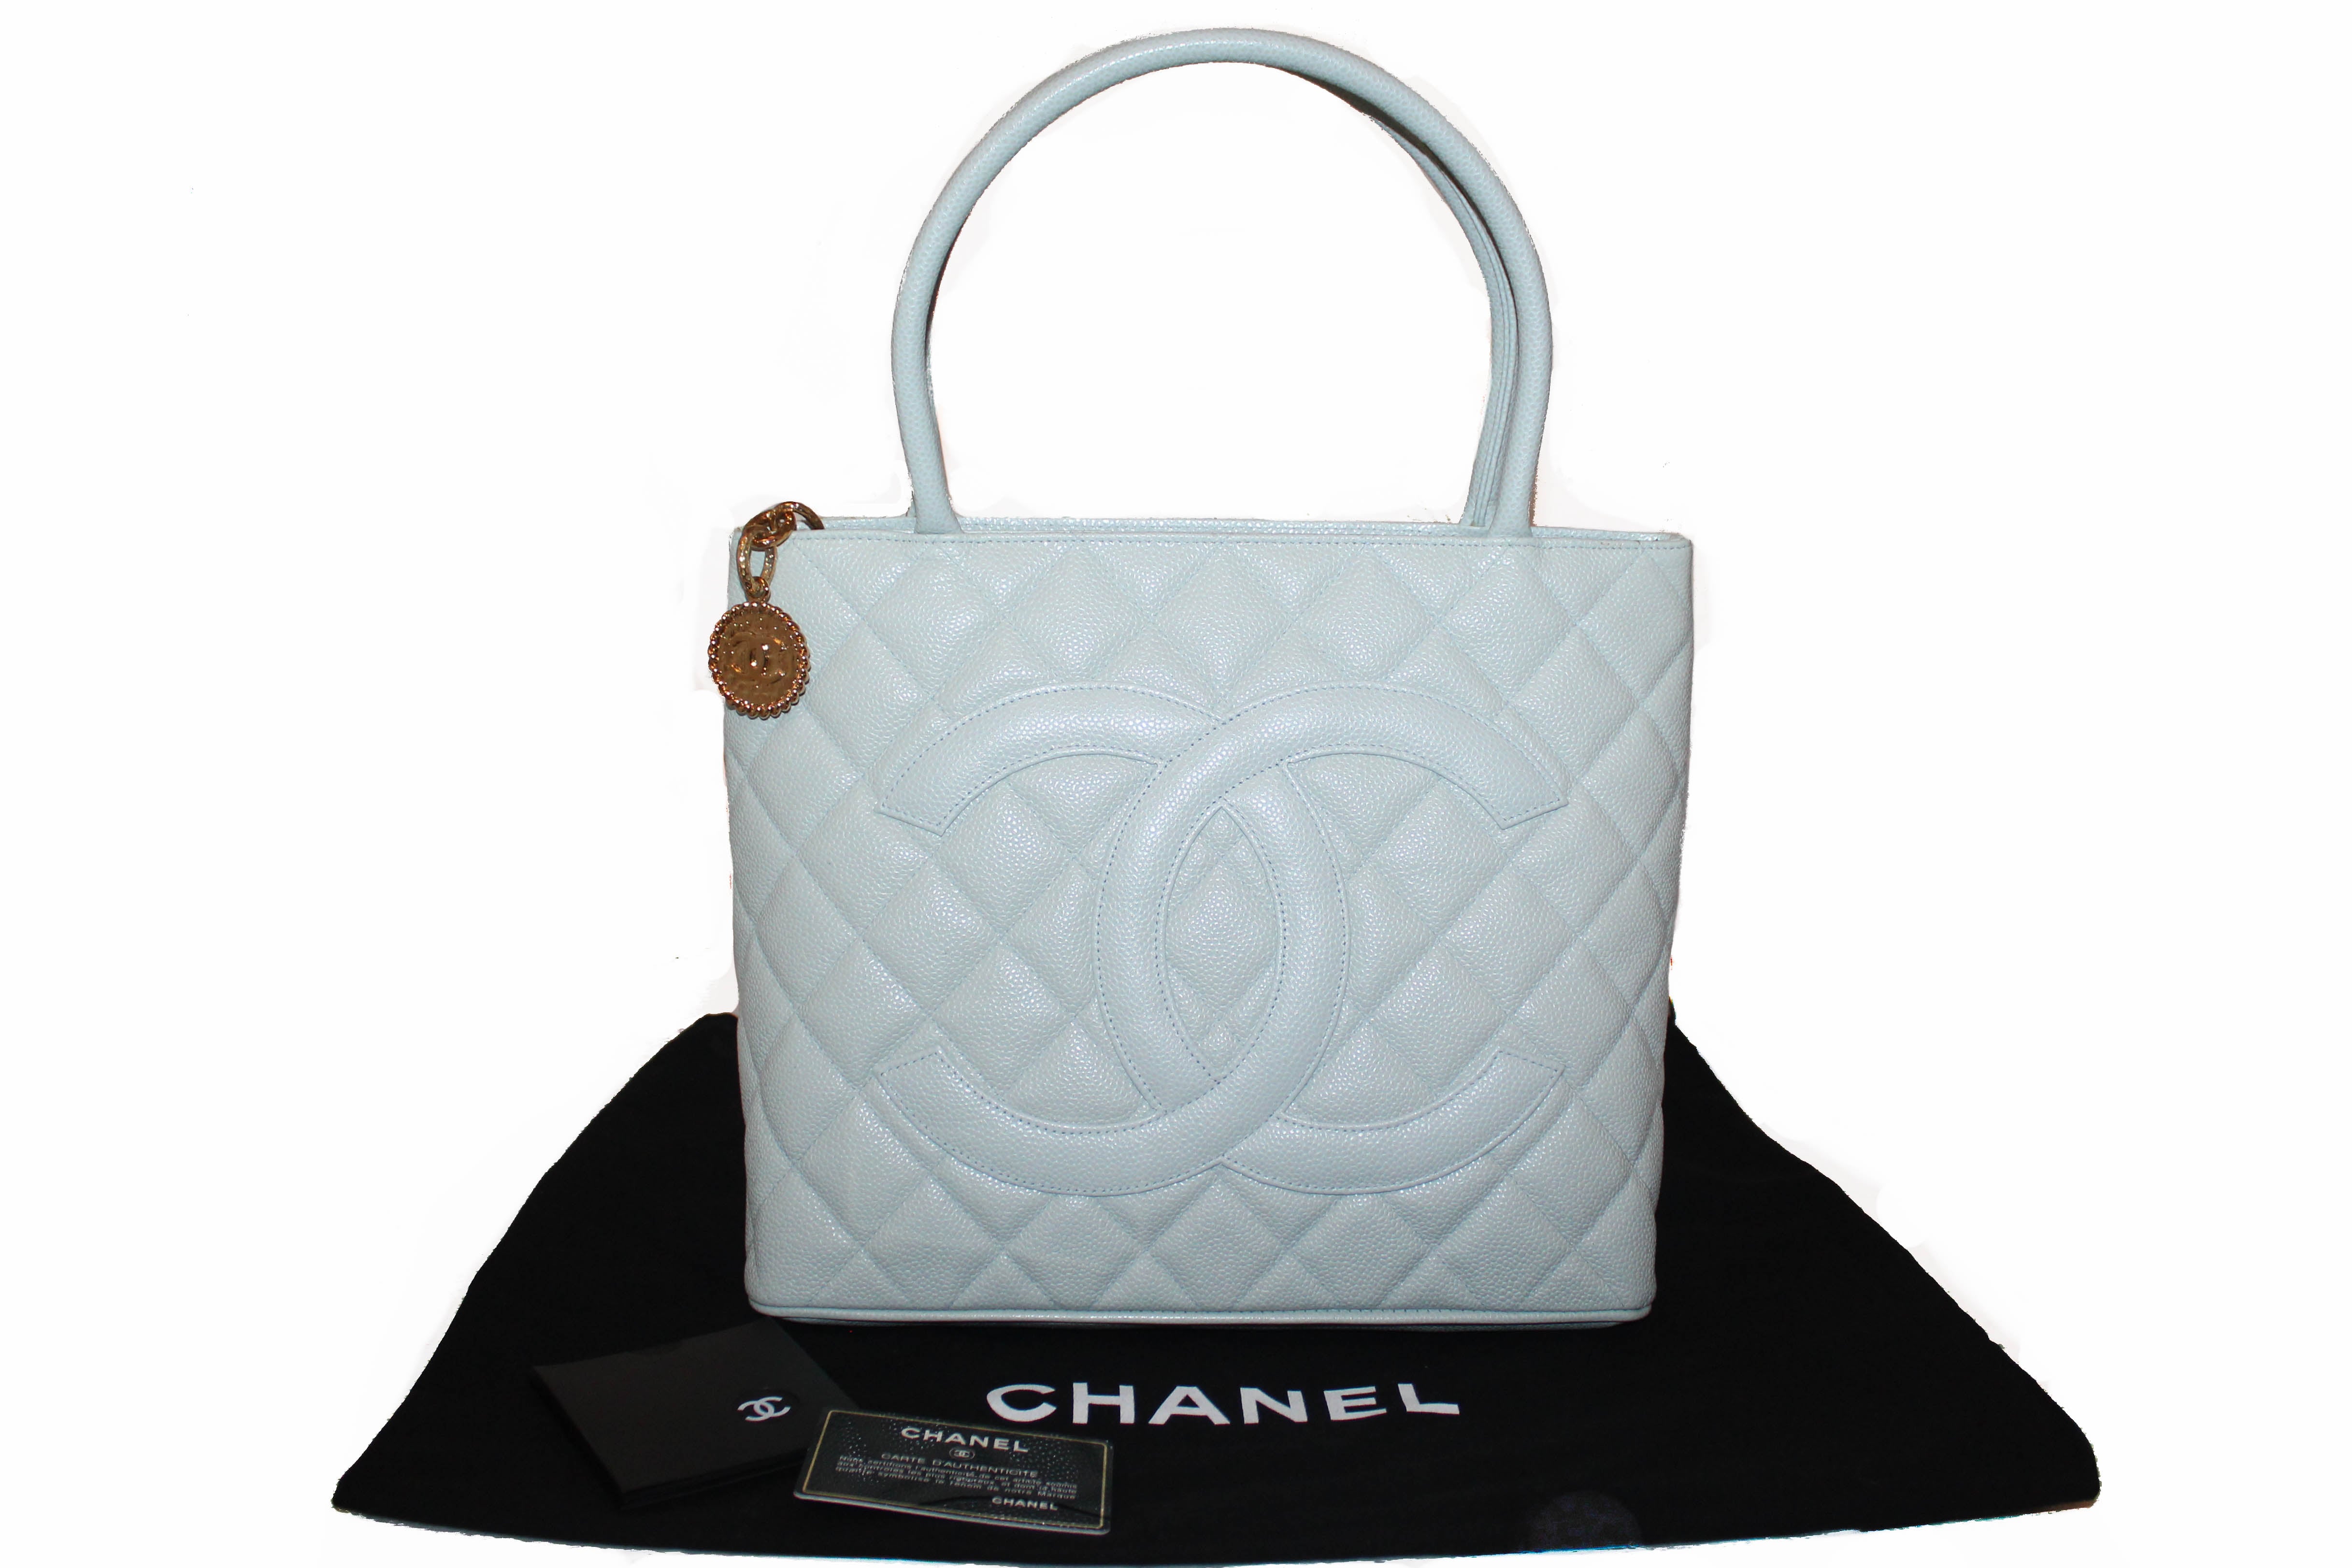 Authentic New Chanel Light Blue Caviar Leather Medallion Shoulder Tote Bag